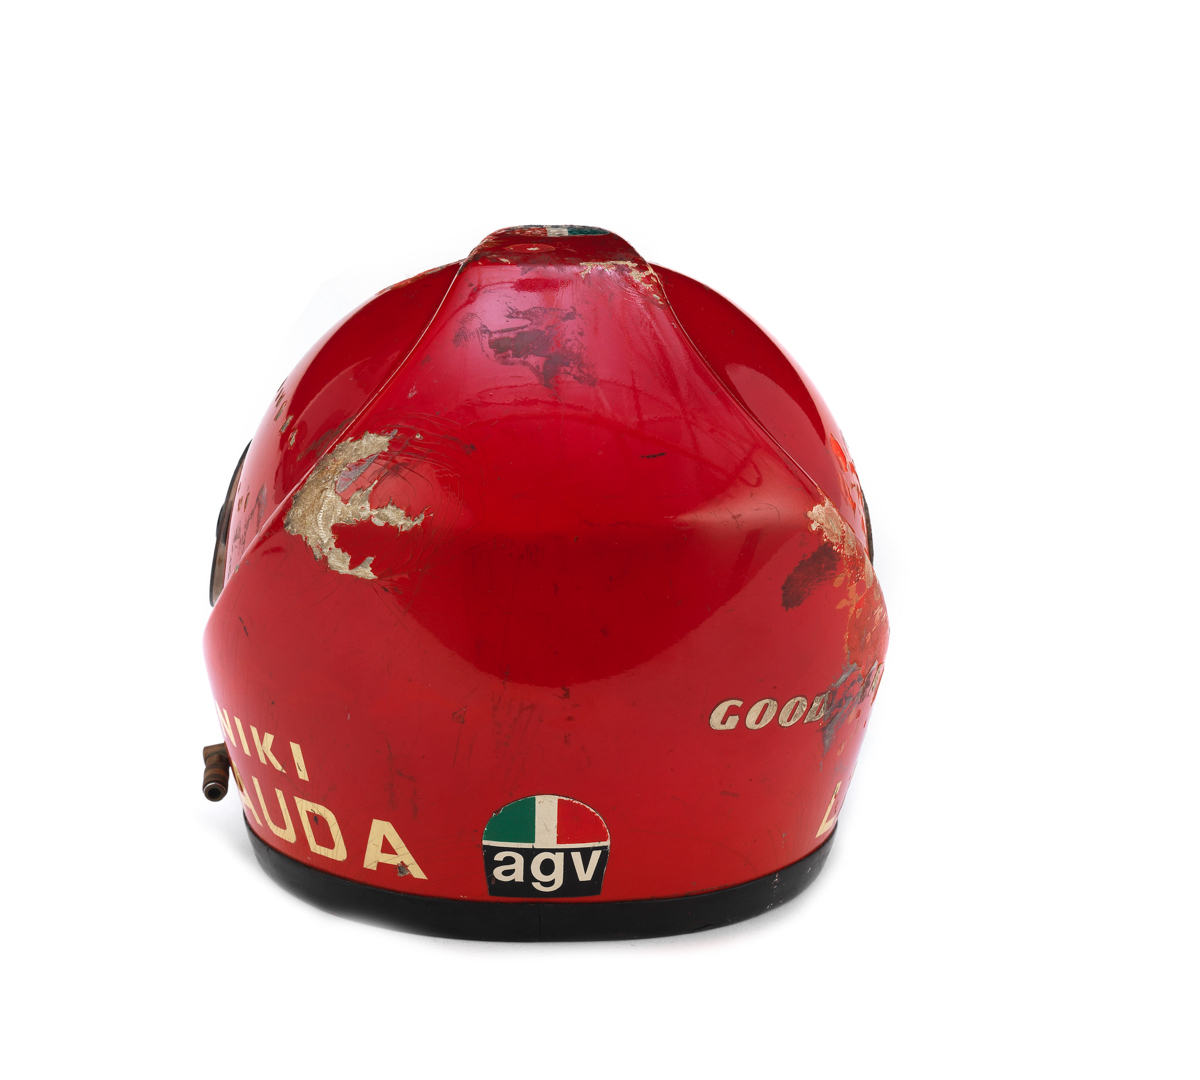 The F1 Helmet Niki Lauda Wore in the Nurburgring Crash Is Going to Auction